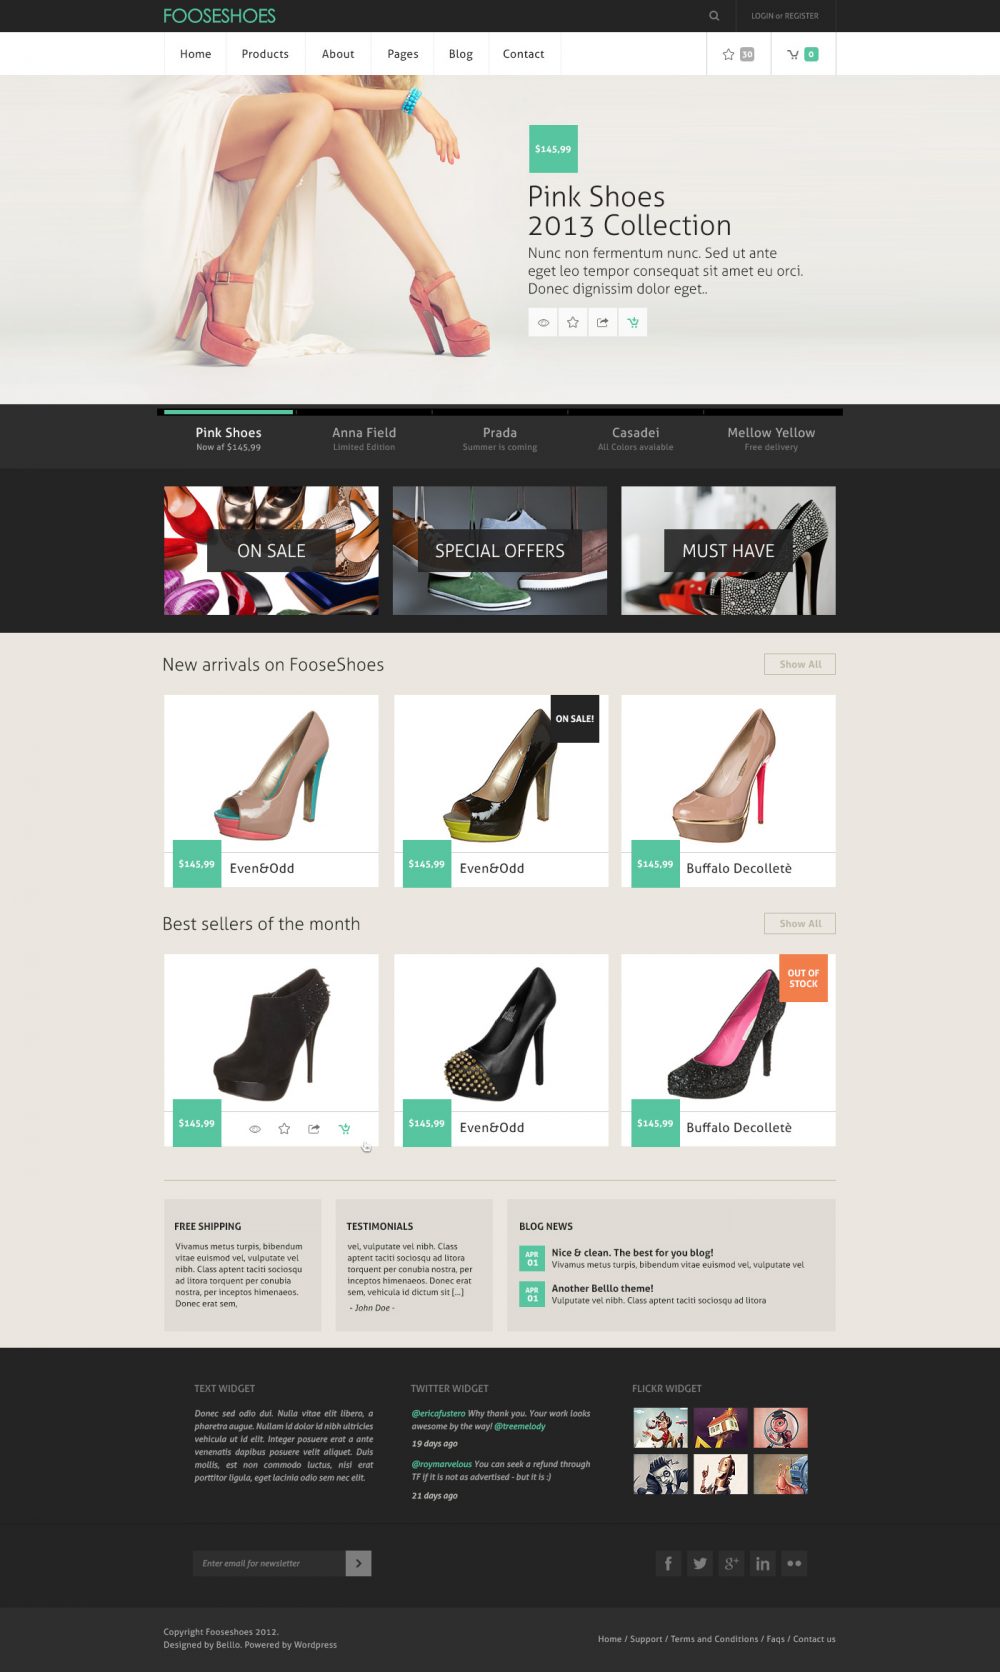 classy-ecommerce-psd-website-template-download-psd